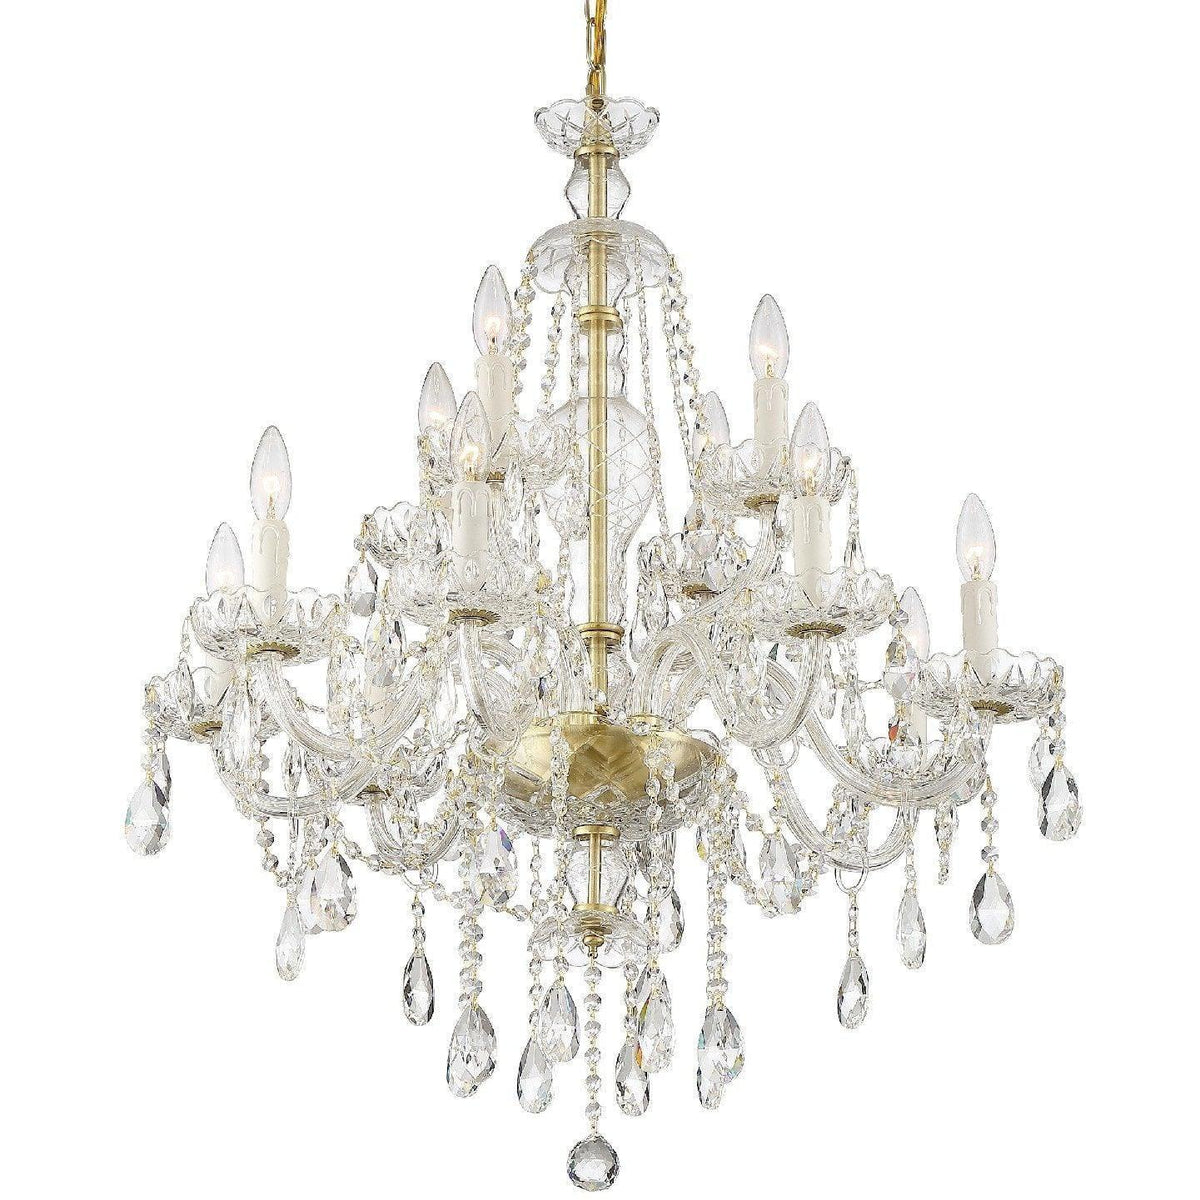 Crystorama - Candace 12 Light Chandelier - CAN-A1312-PB-CL-SAQ | Montreal Lighting & Hardware